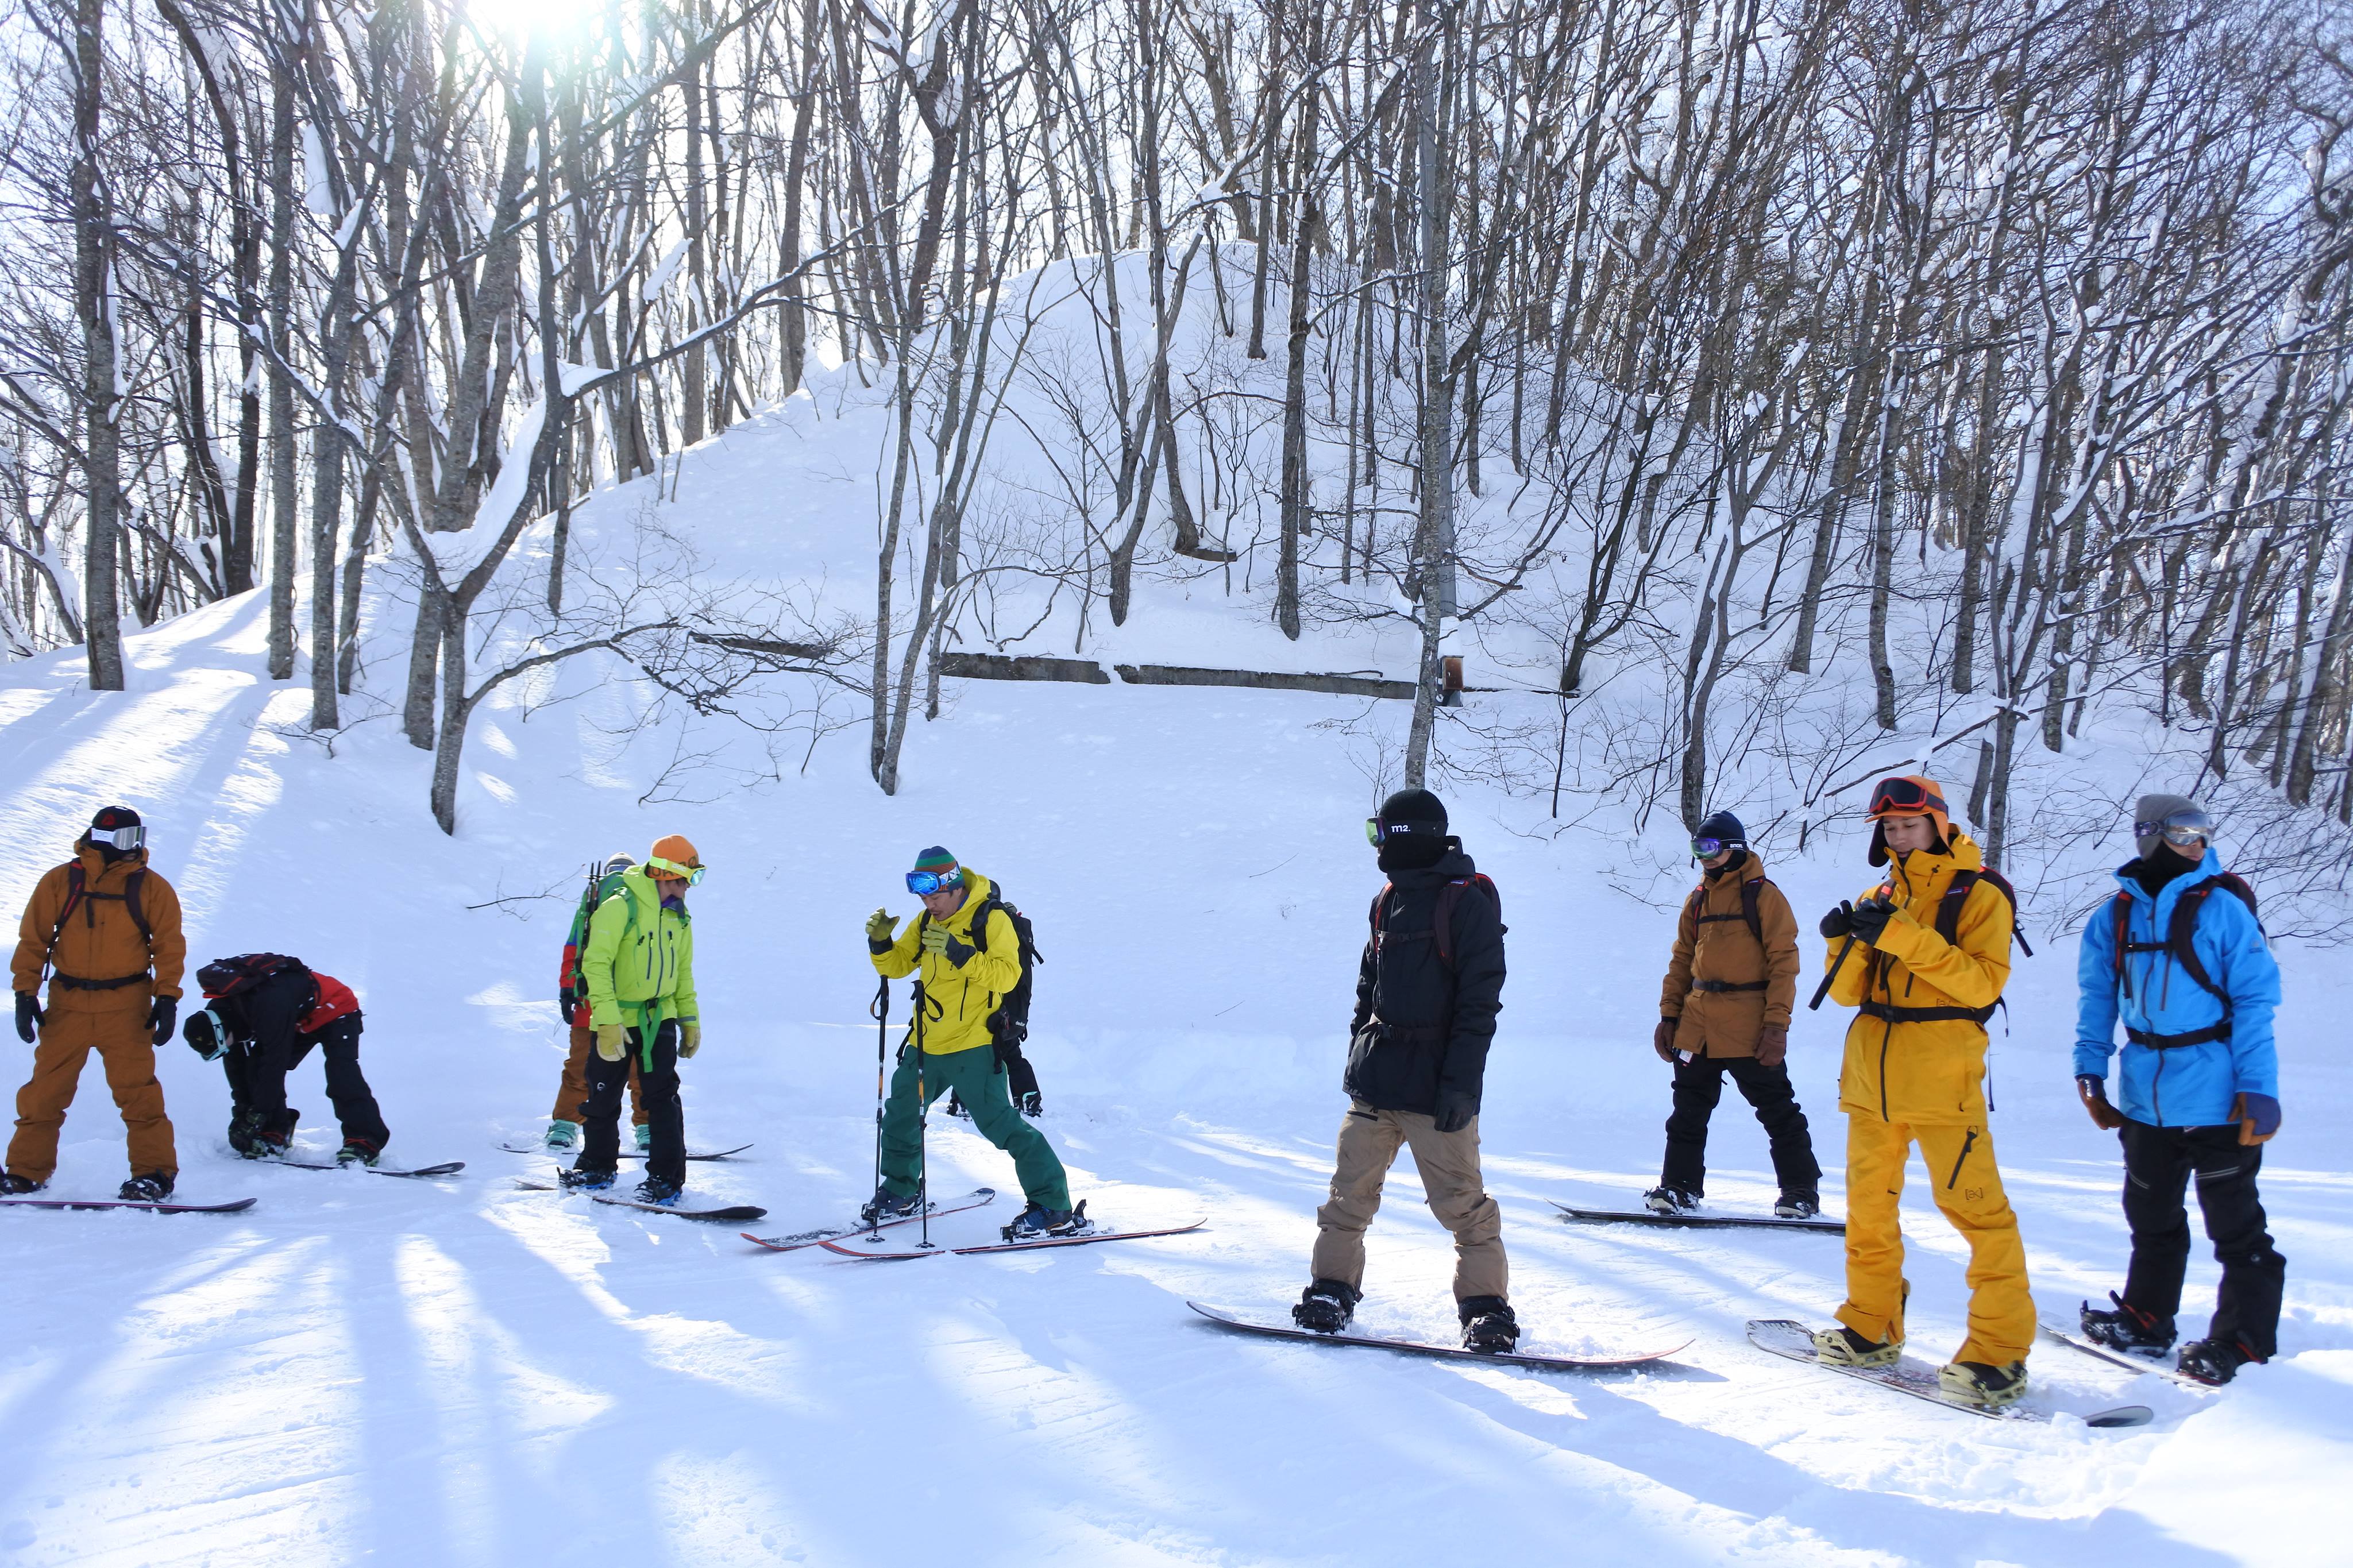 ▲ The topical GPG tour where you can enjoy powder with only a limited number of people